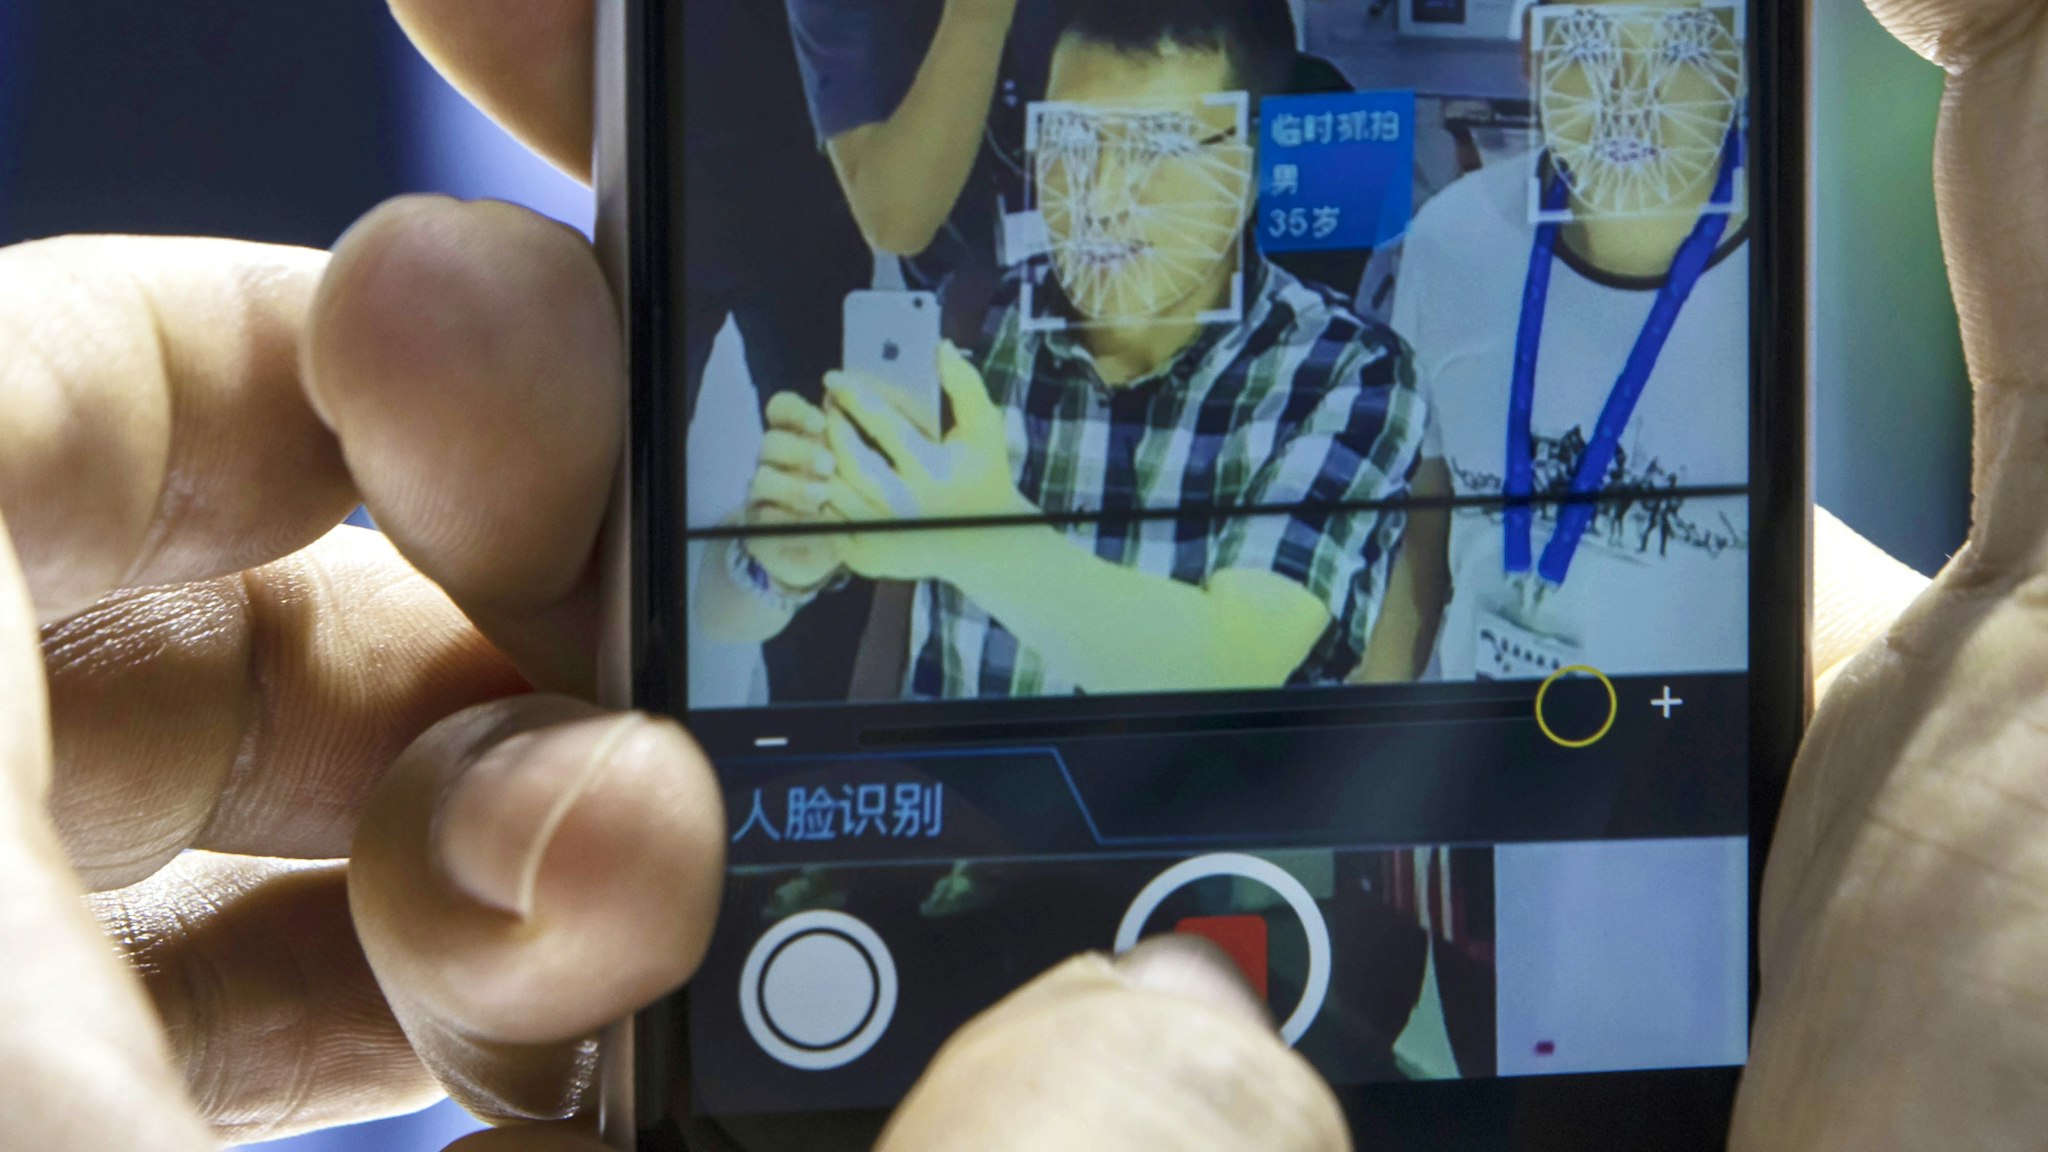 An attendee uses his smartphone to record a facial-recognition demonstration on himself at the Beijing Megvii Co. booth at the MWC Shanghai exhibition in Shanghai, China, on Thursday, June 27, 2019. The Shanghai event is modeled after a bigger annual industry show in Barcelona.